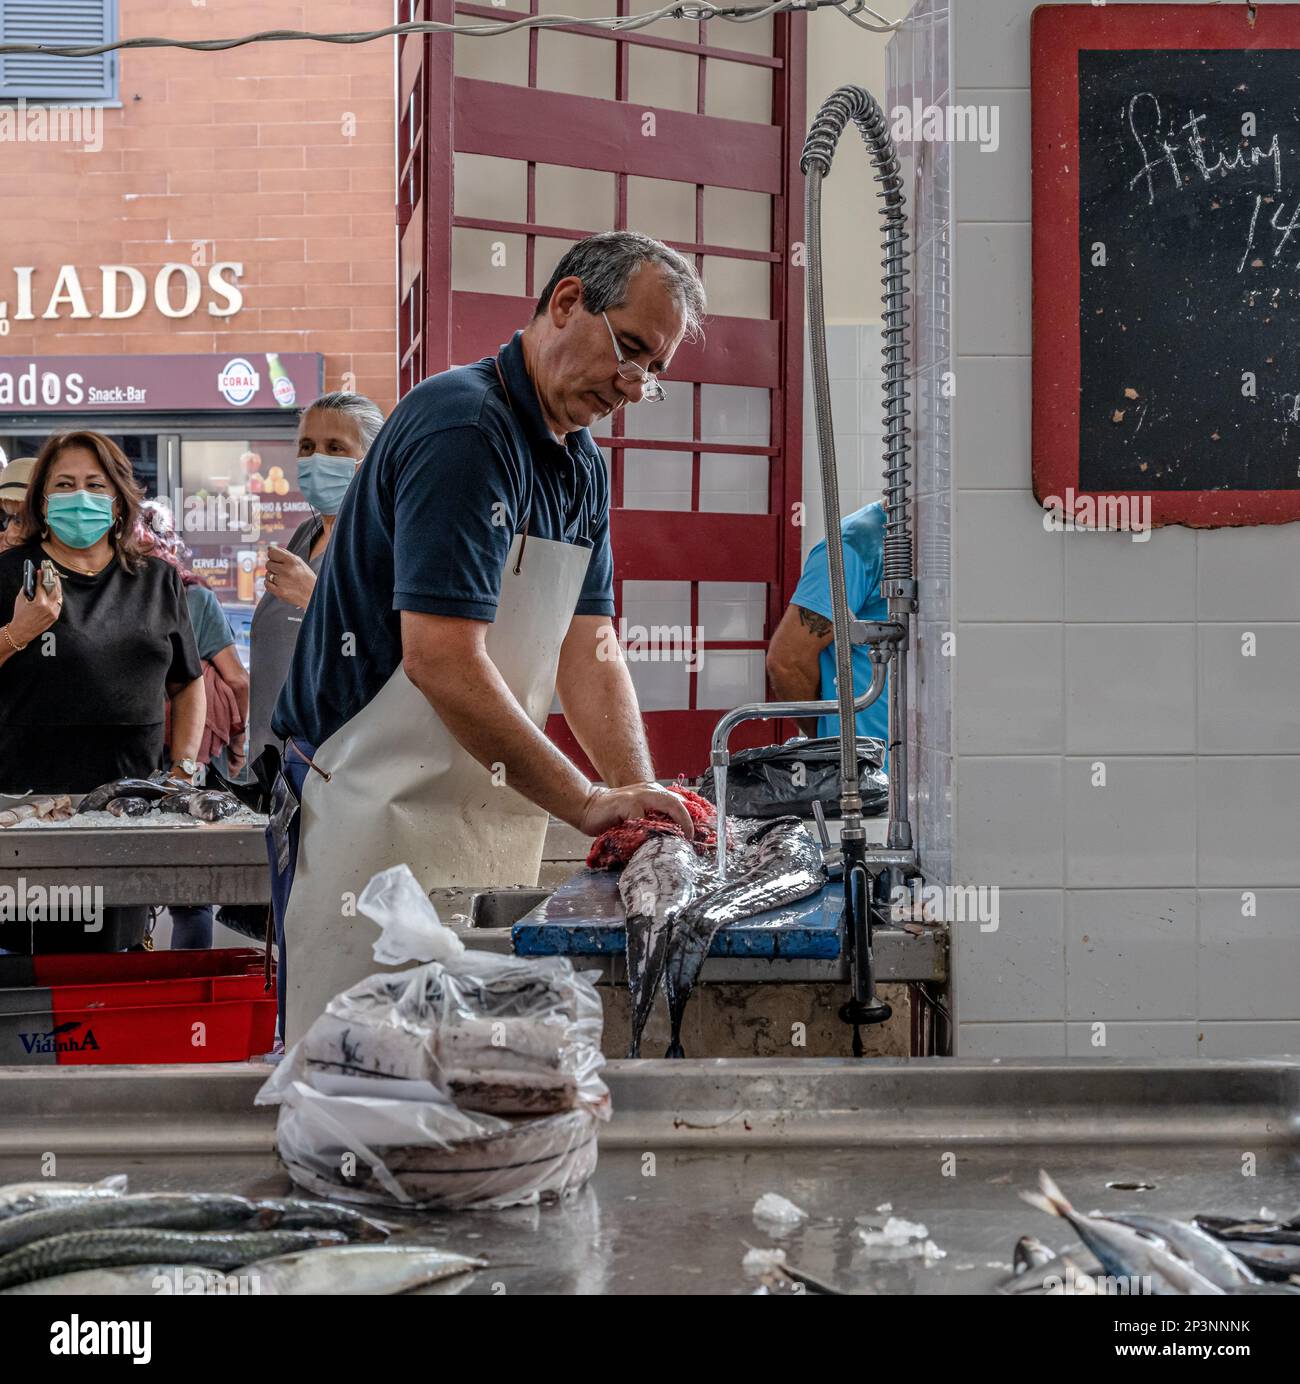 Local fish being prepared in the fish market, Funchal, Madeira Stock Photo